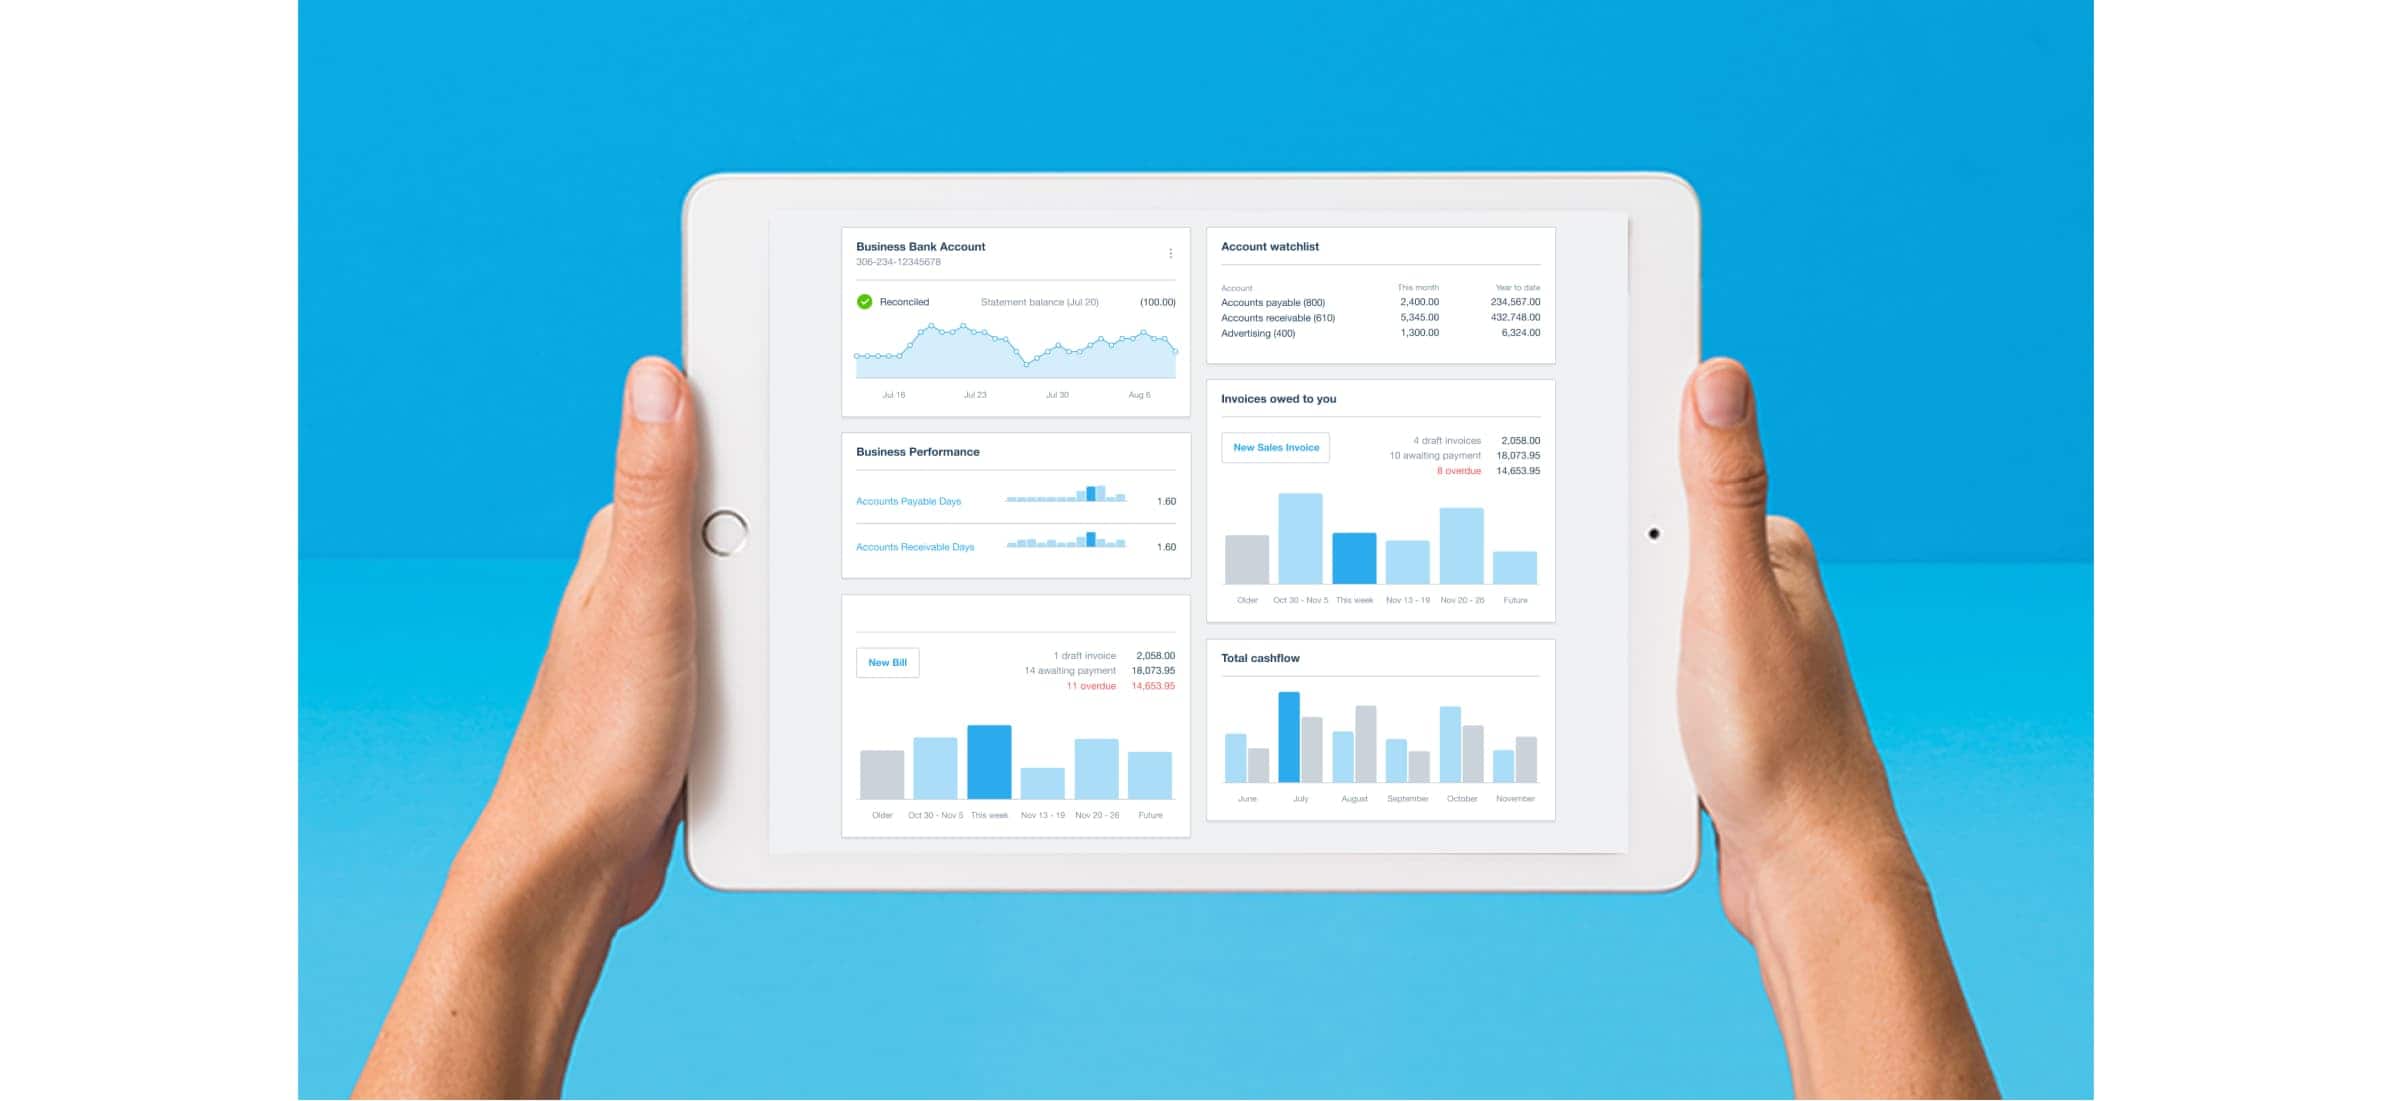 Hands holding a tablet with business bank account graphs and data. 